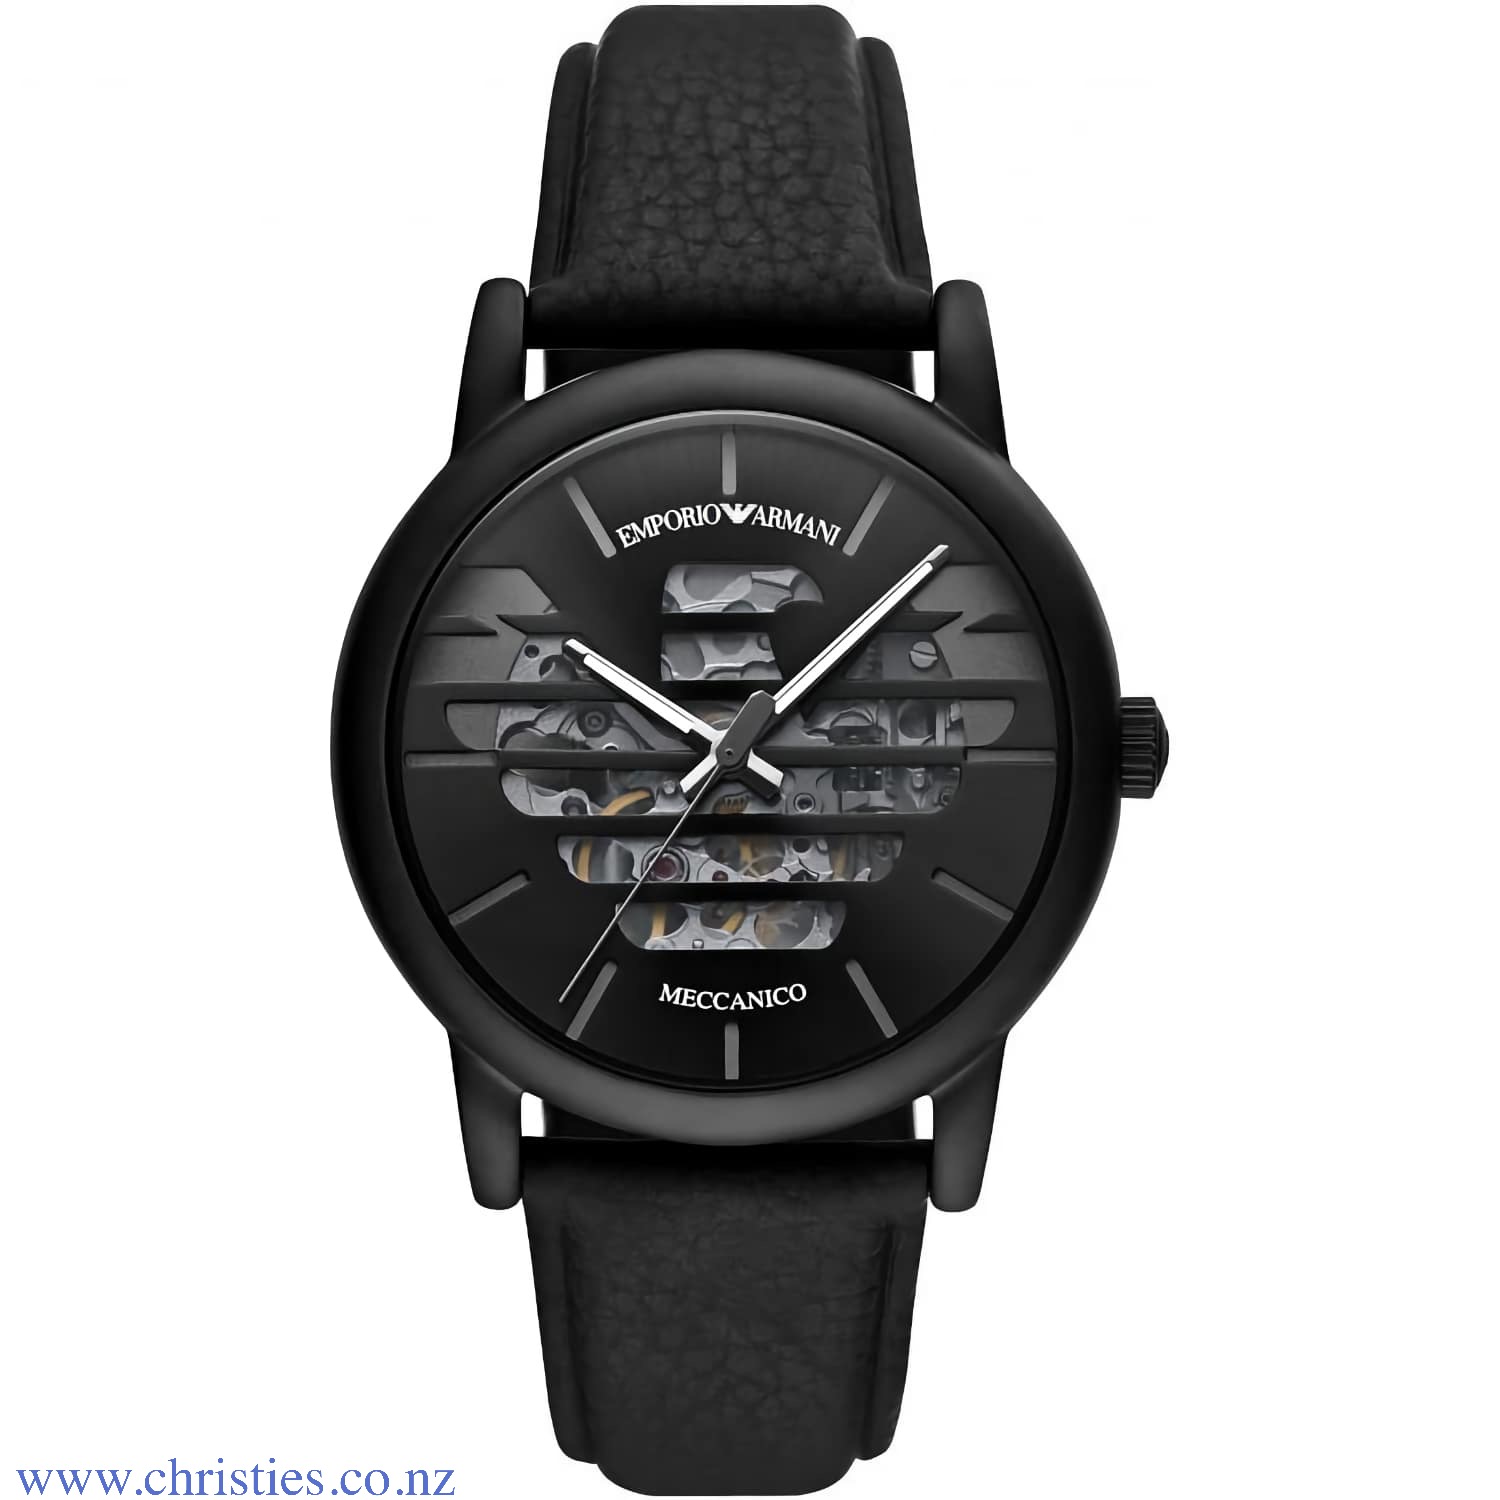 AR60032 Emporio Armani Meccanico Watch. The Emporio Armani AR60032 is a unique mens  watch. The case material is stainless steel with an IP black finish LAYBUY - Pay it easy, in 6 weekly payments and have it now. Only pay the price of @christies.online